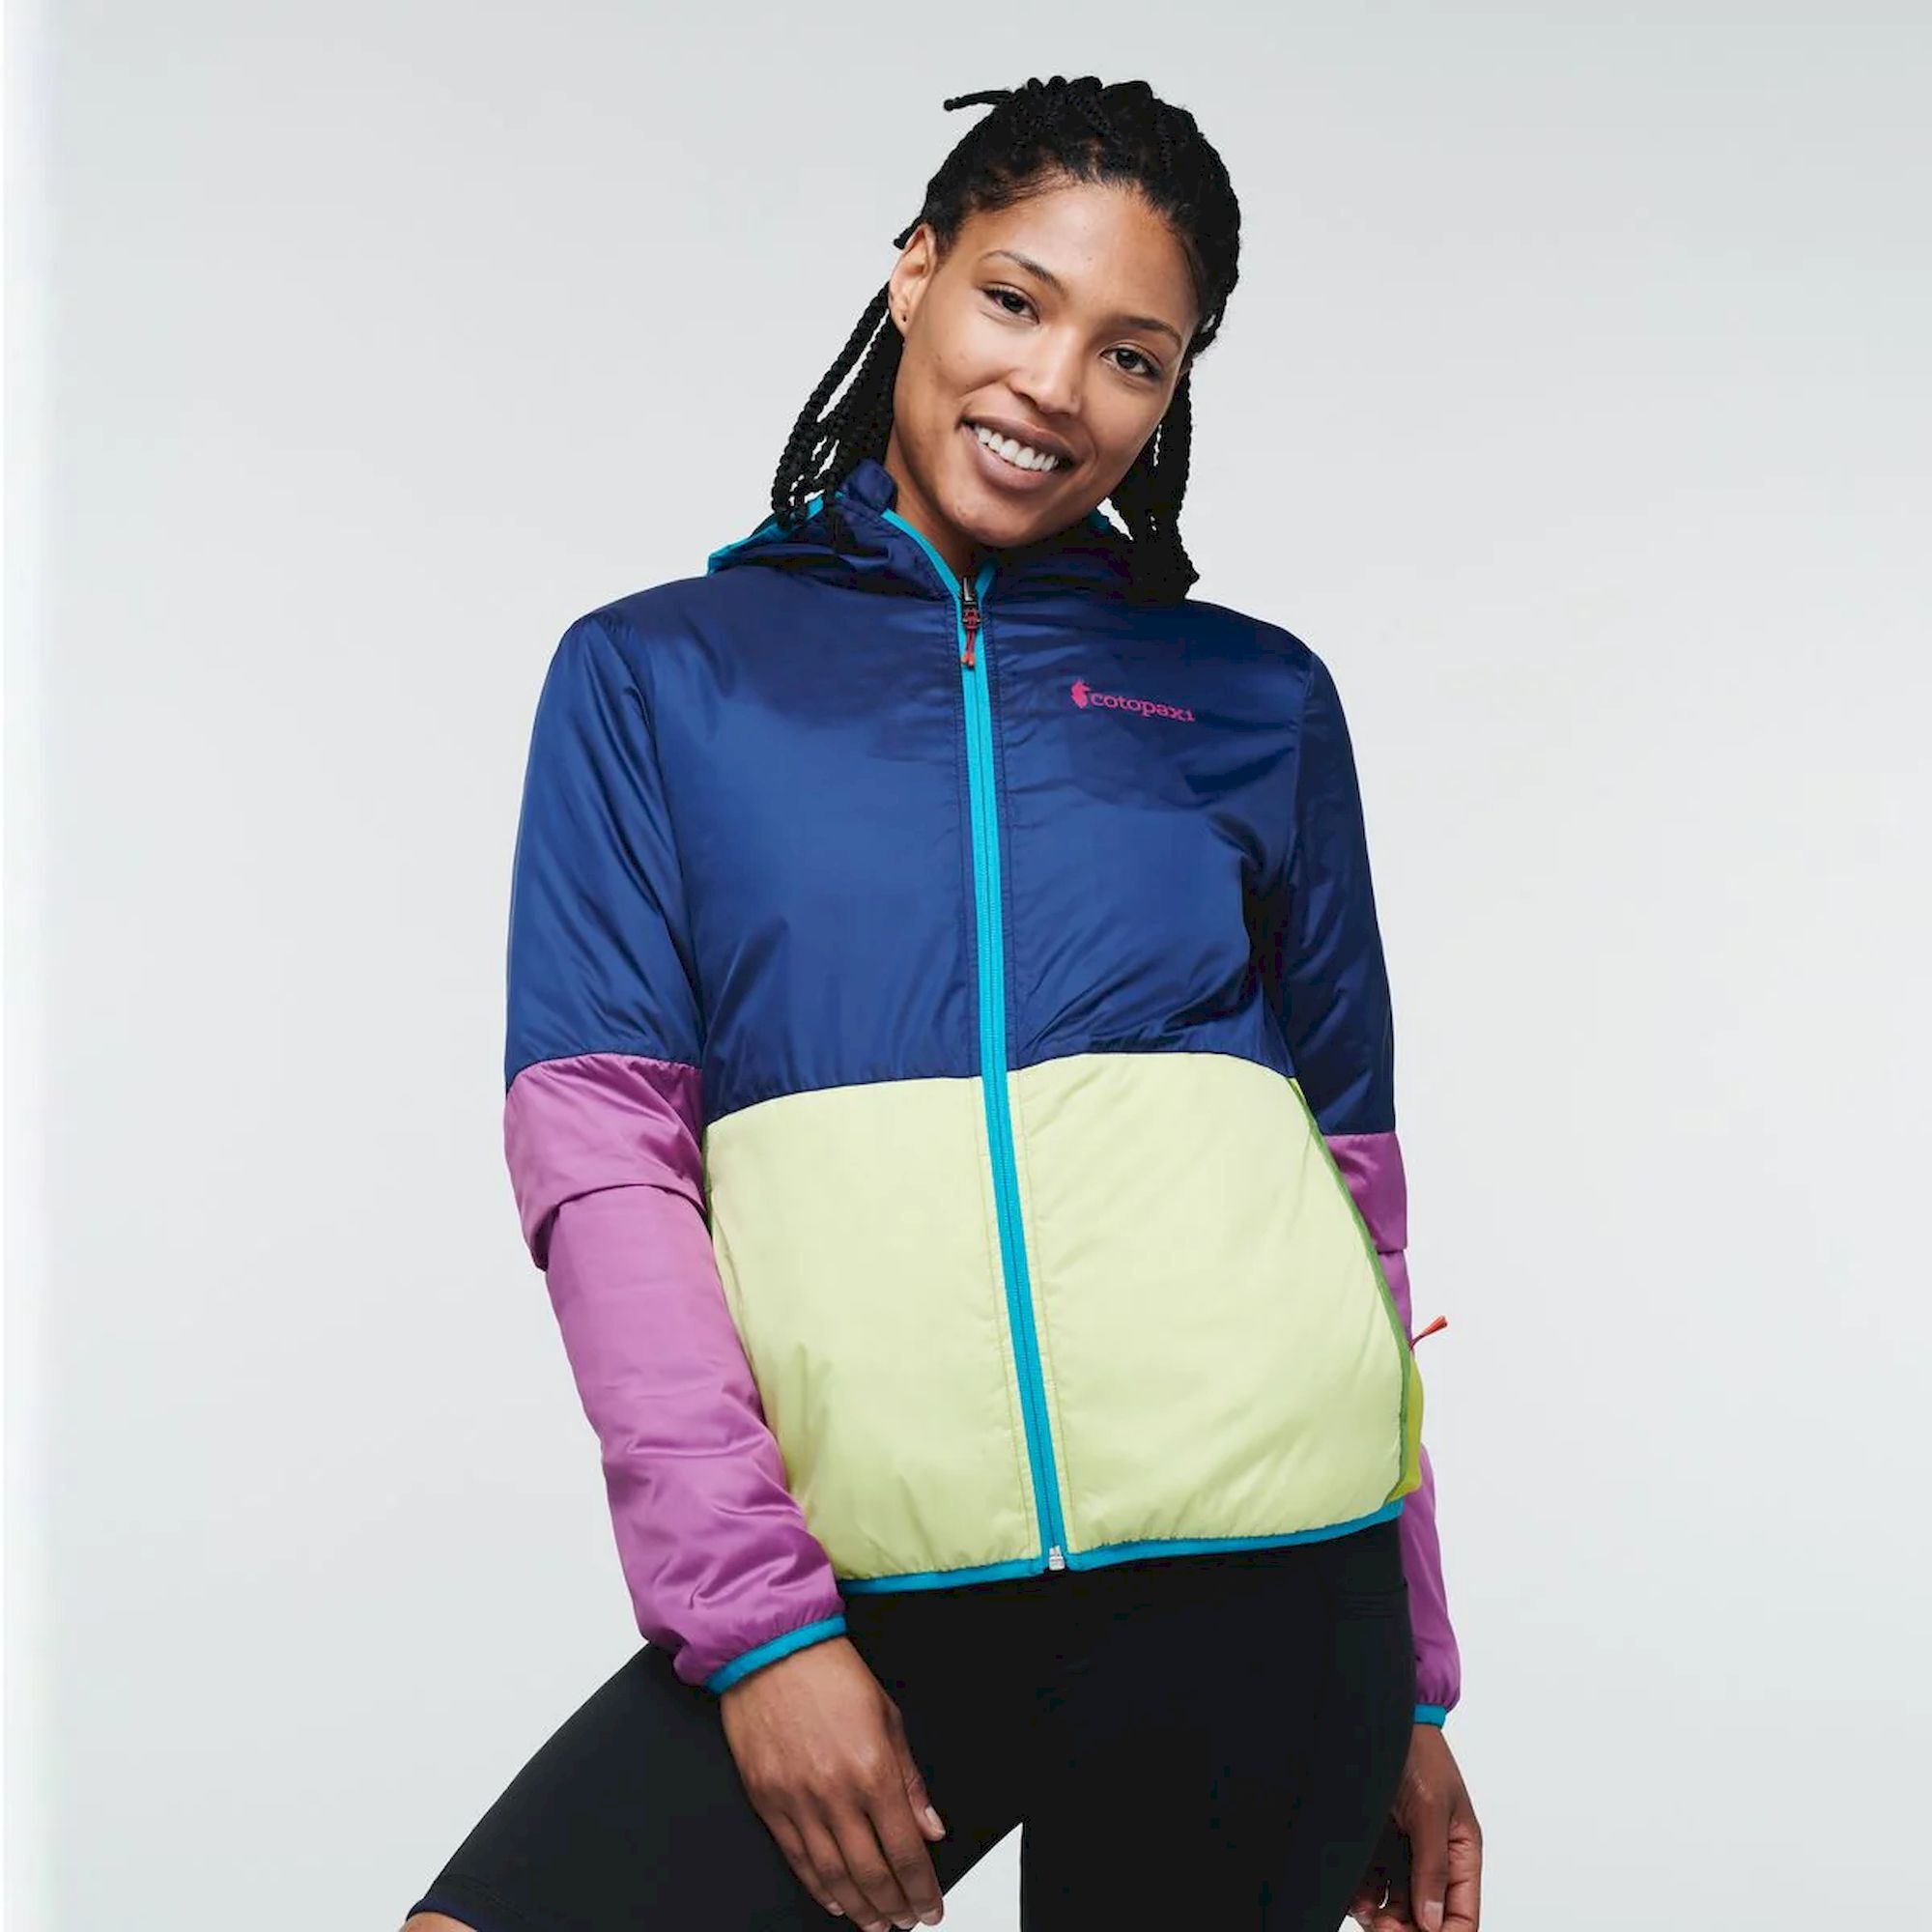 Holebrook Mimmi Windproof Jacket - Ladies from Humes Outfitters